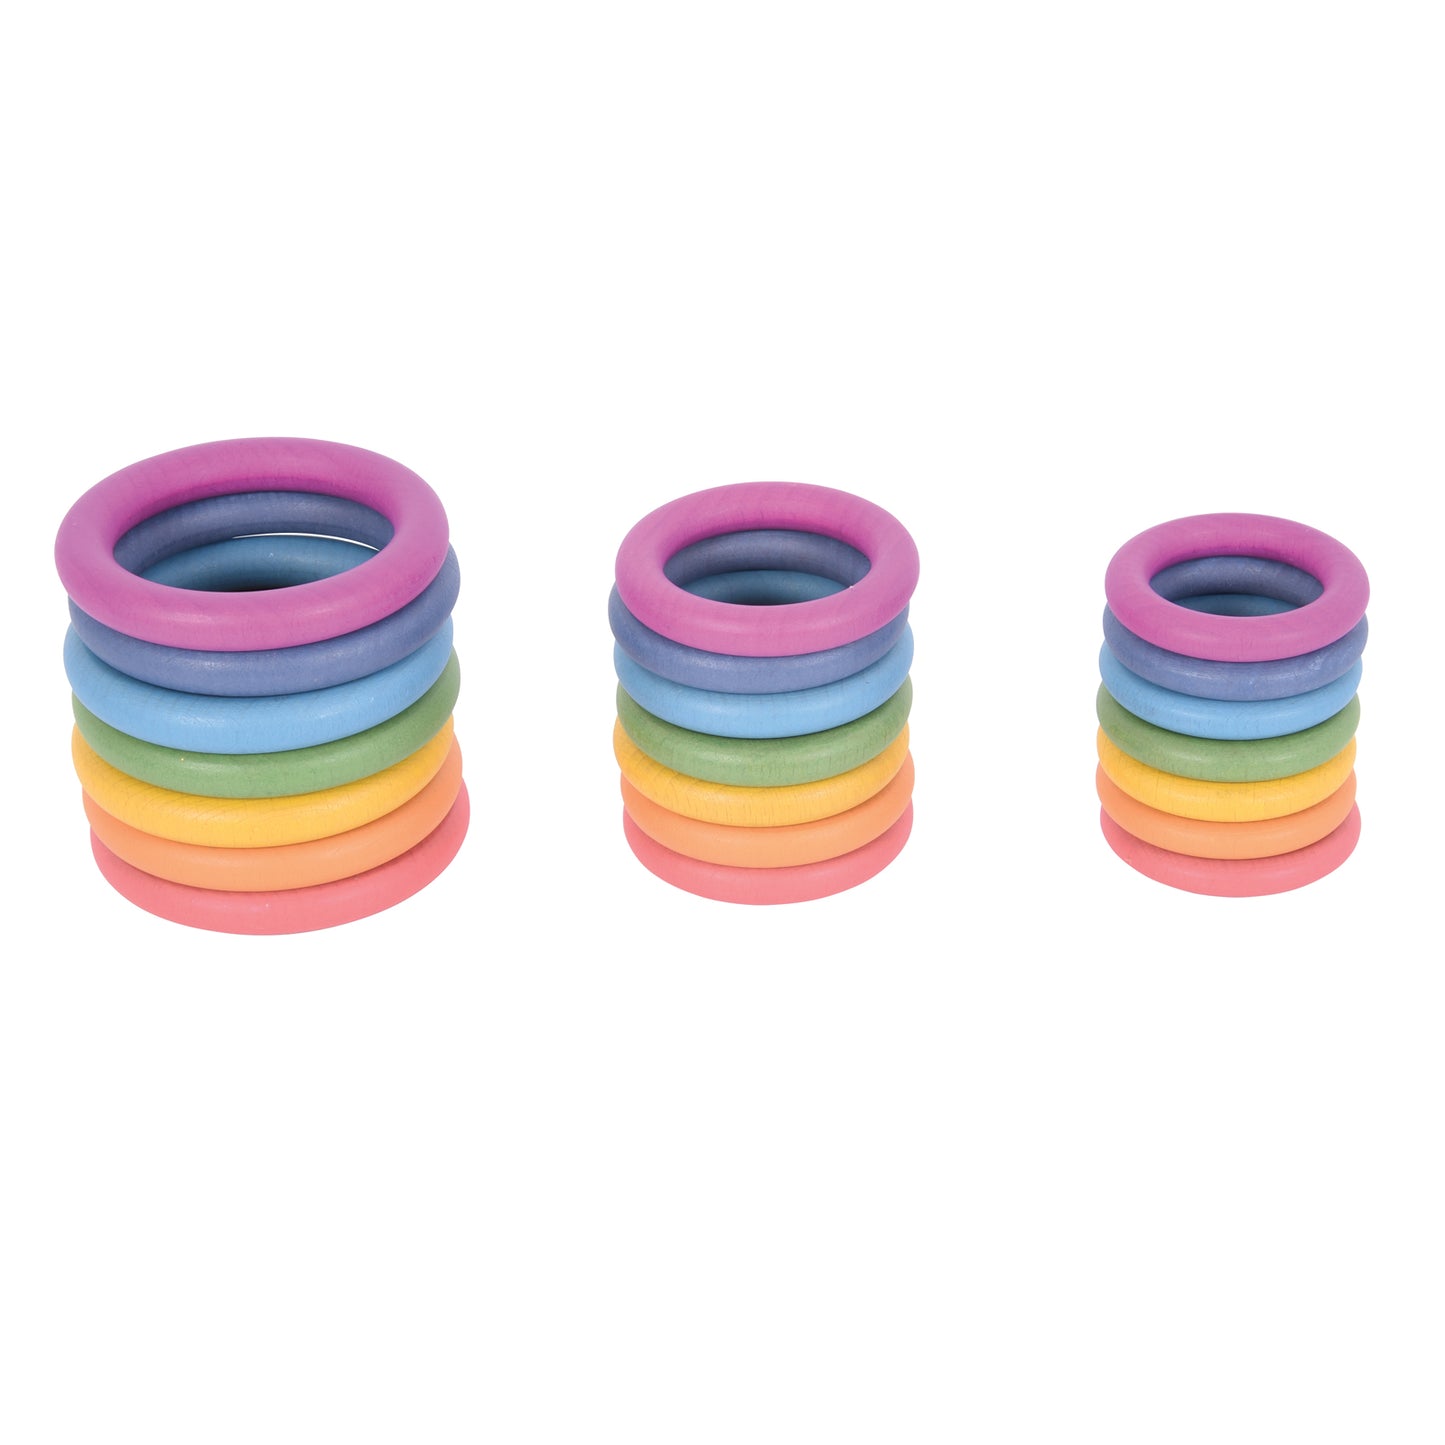 Rainbow Wooden Rings - Set of 21 - 3 Sizes - Counting and Sorting Rings